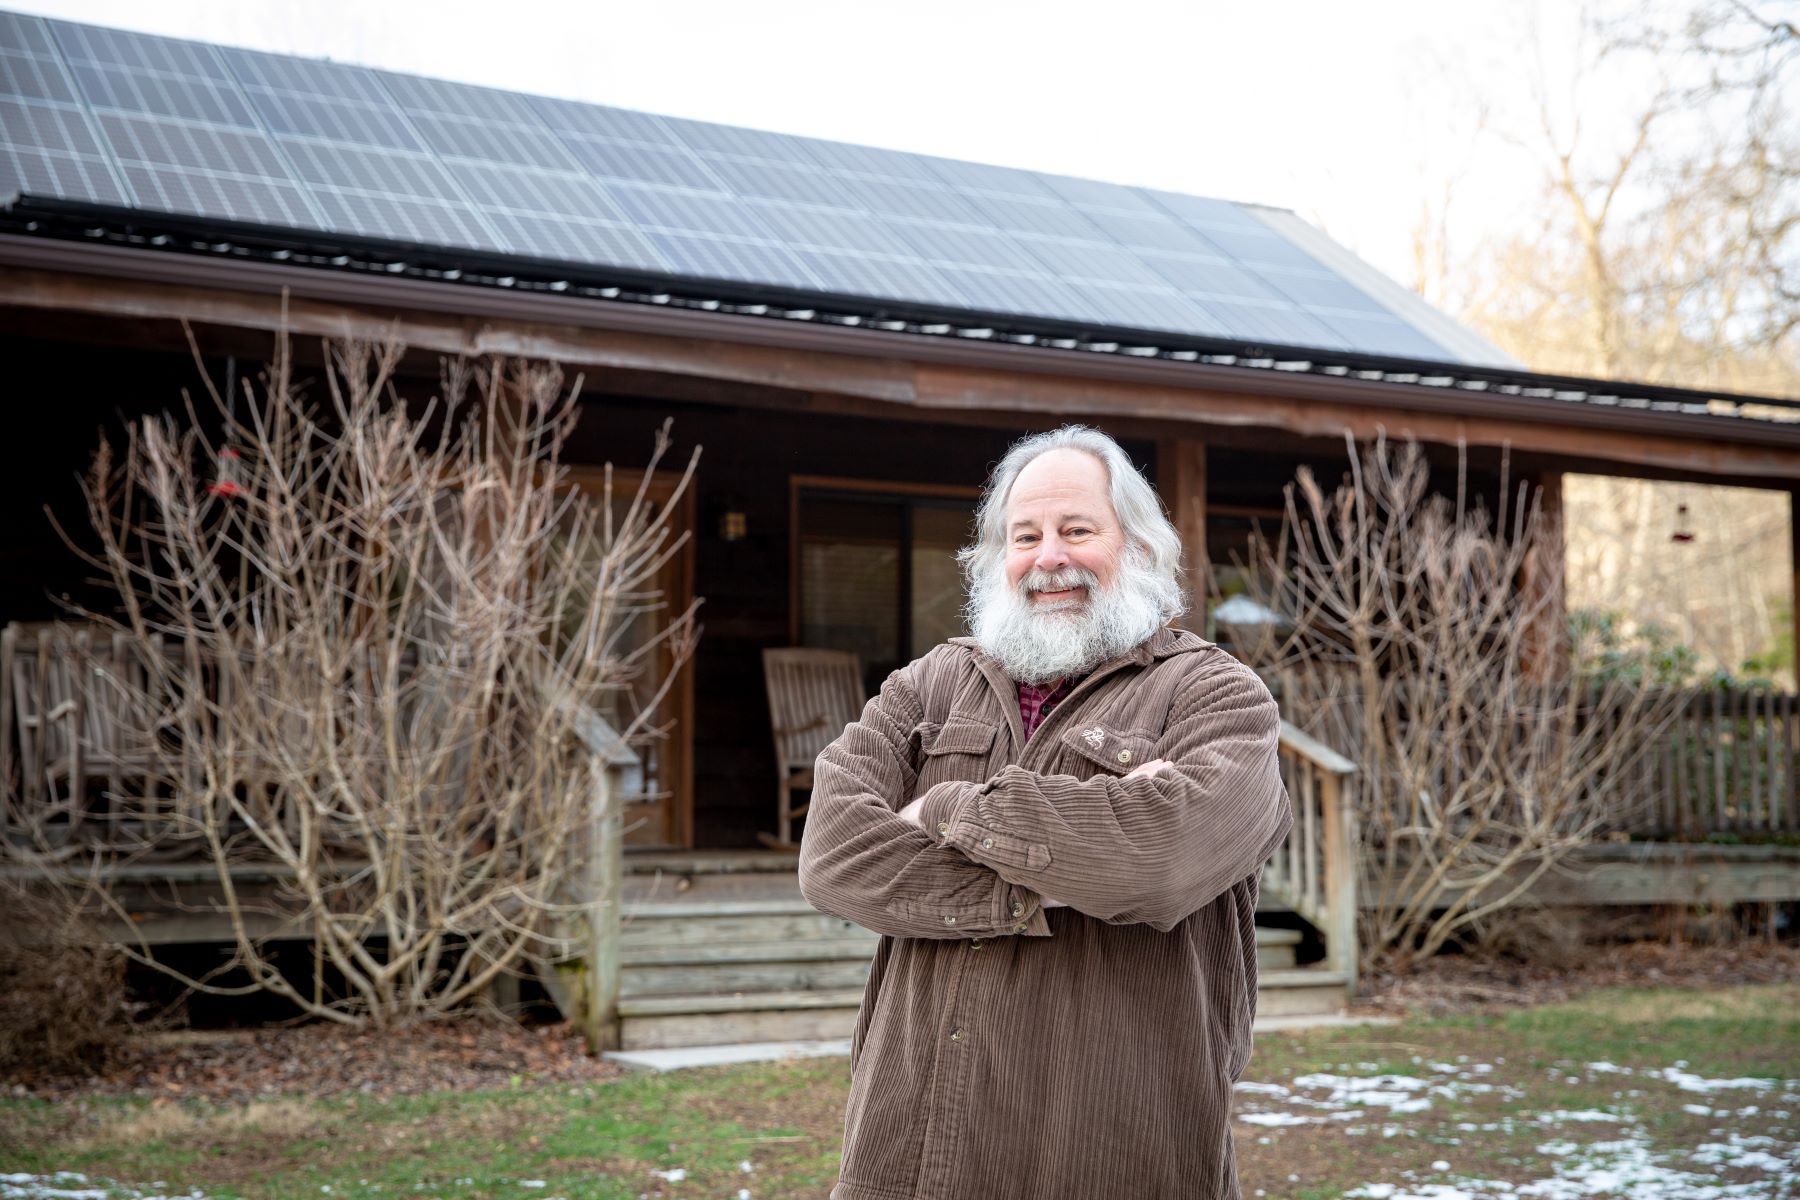 Borrower standing in front of his cabin rental business, with solar on the roof